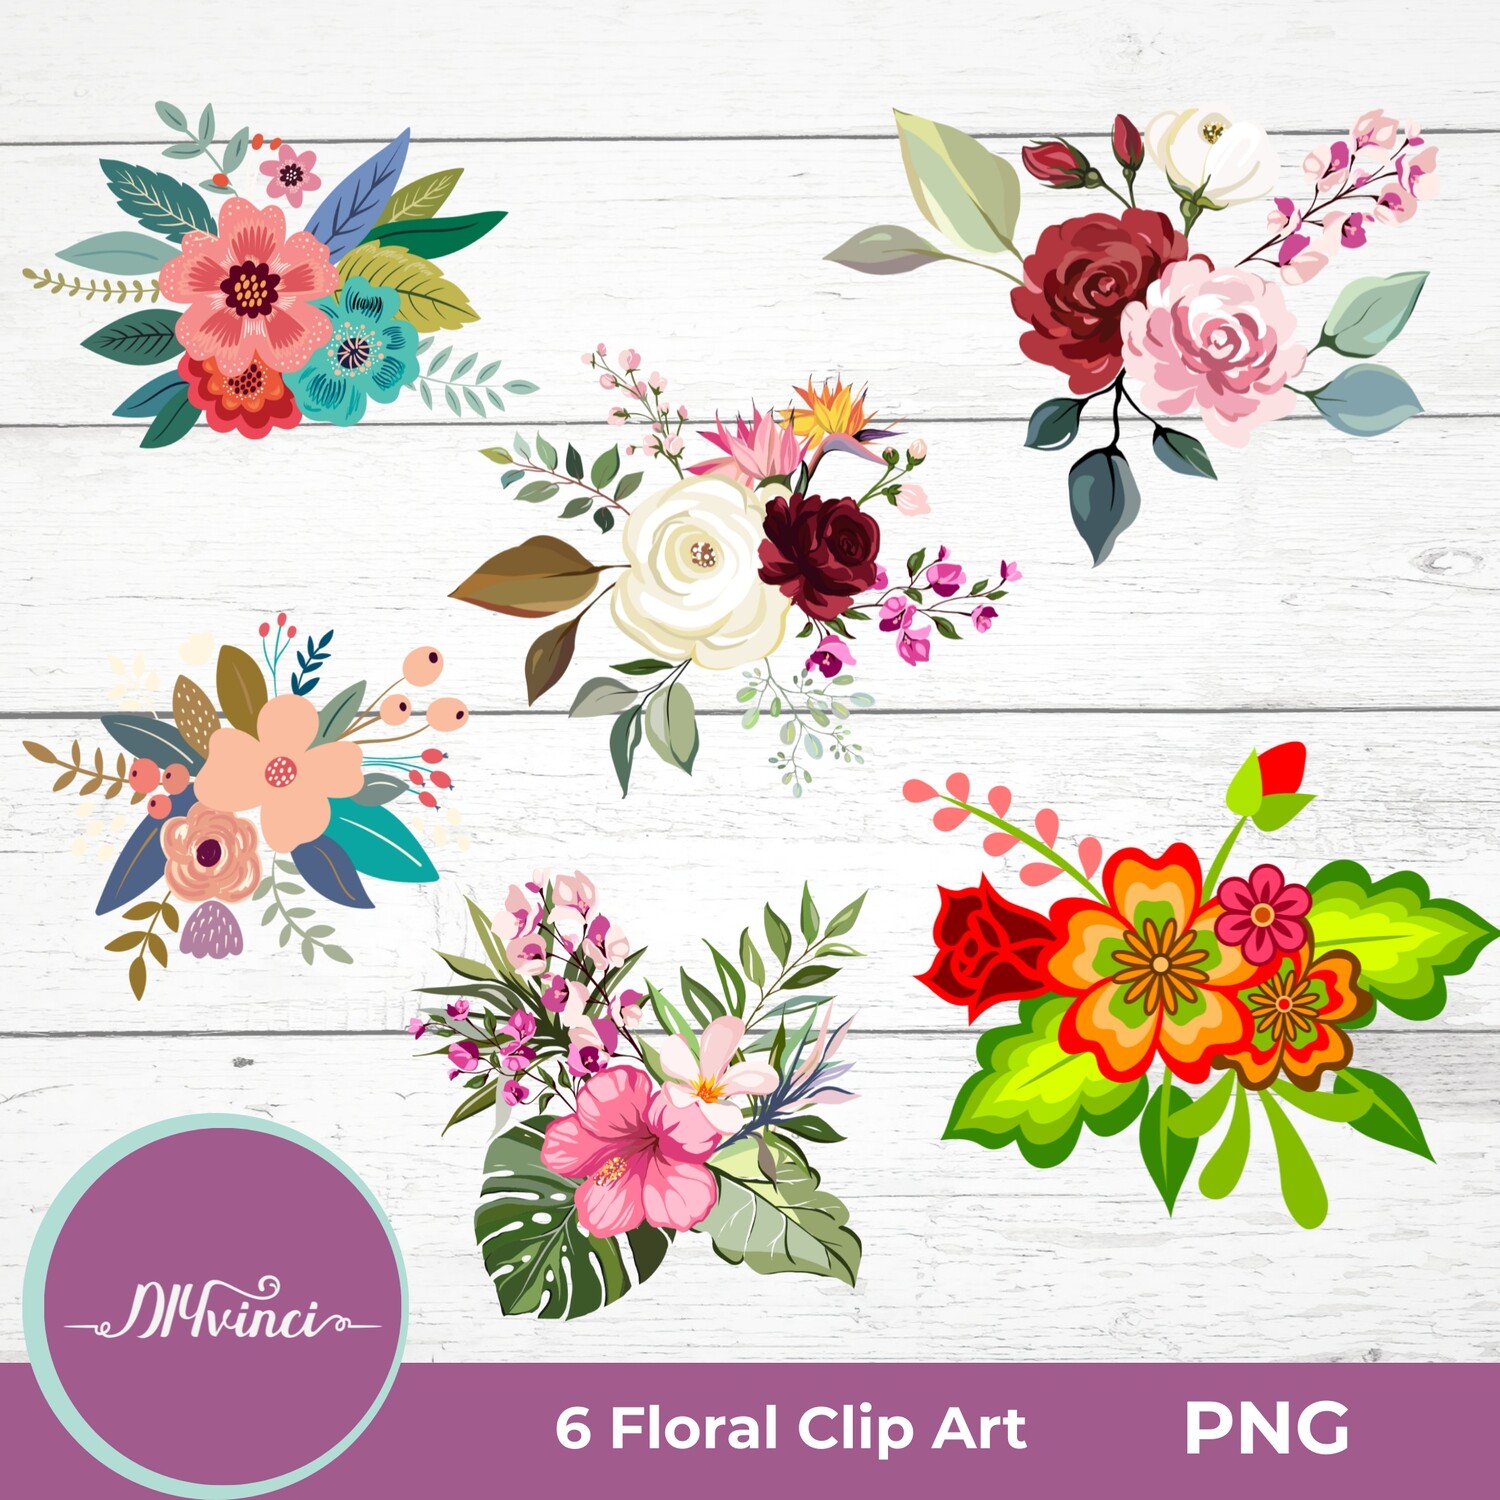 6 Floral Clip Art - PNG - Personal & Commercial Use